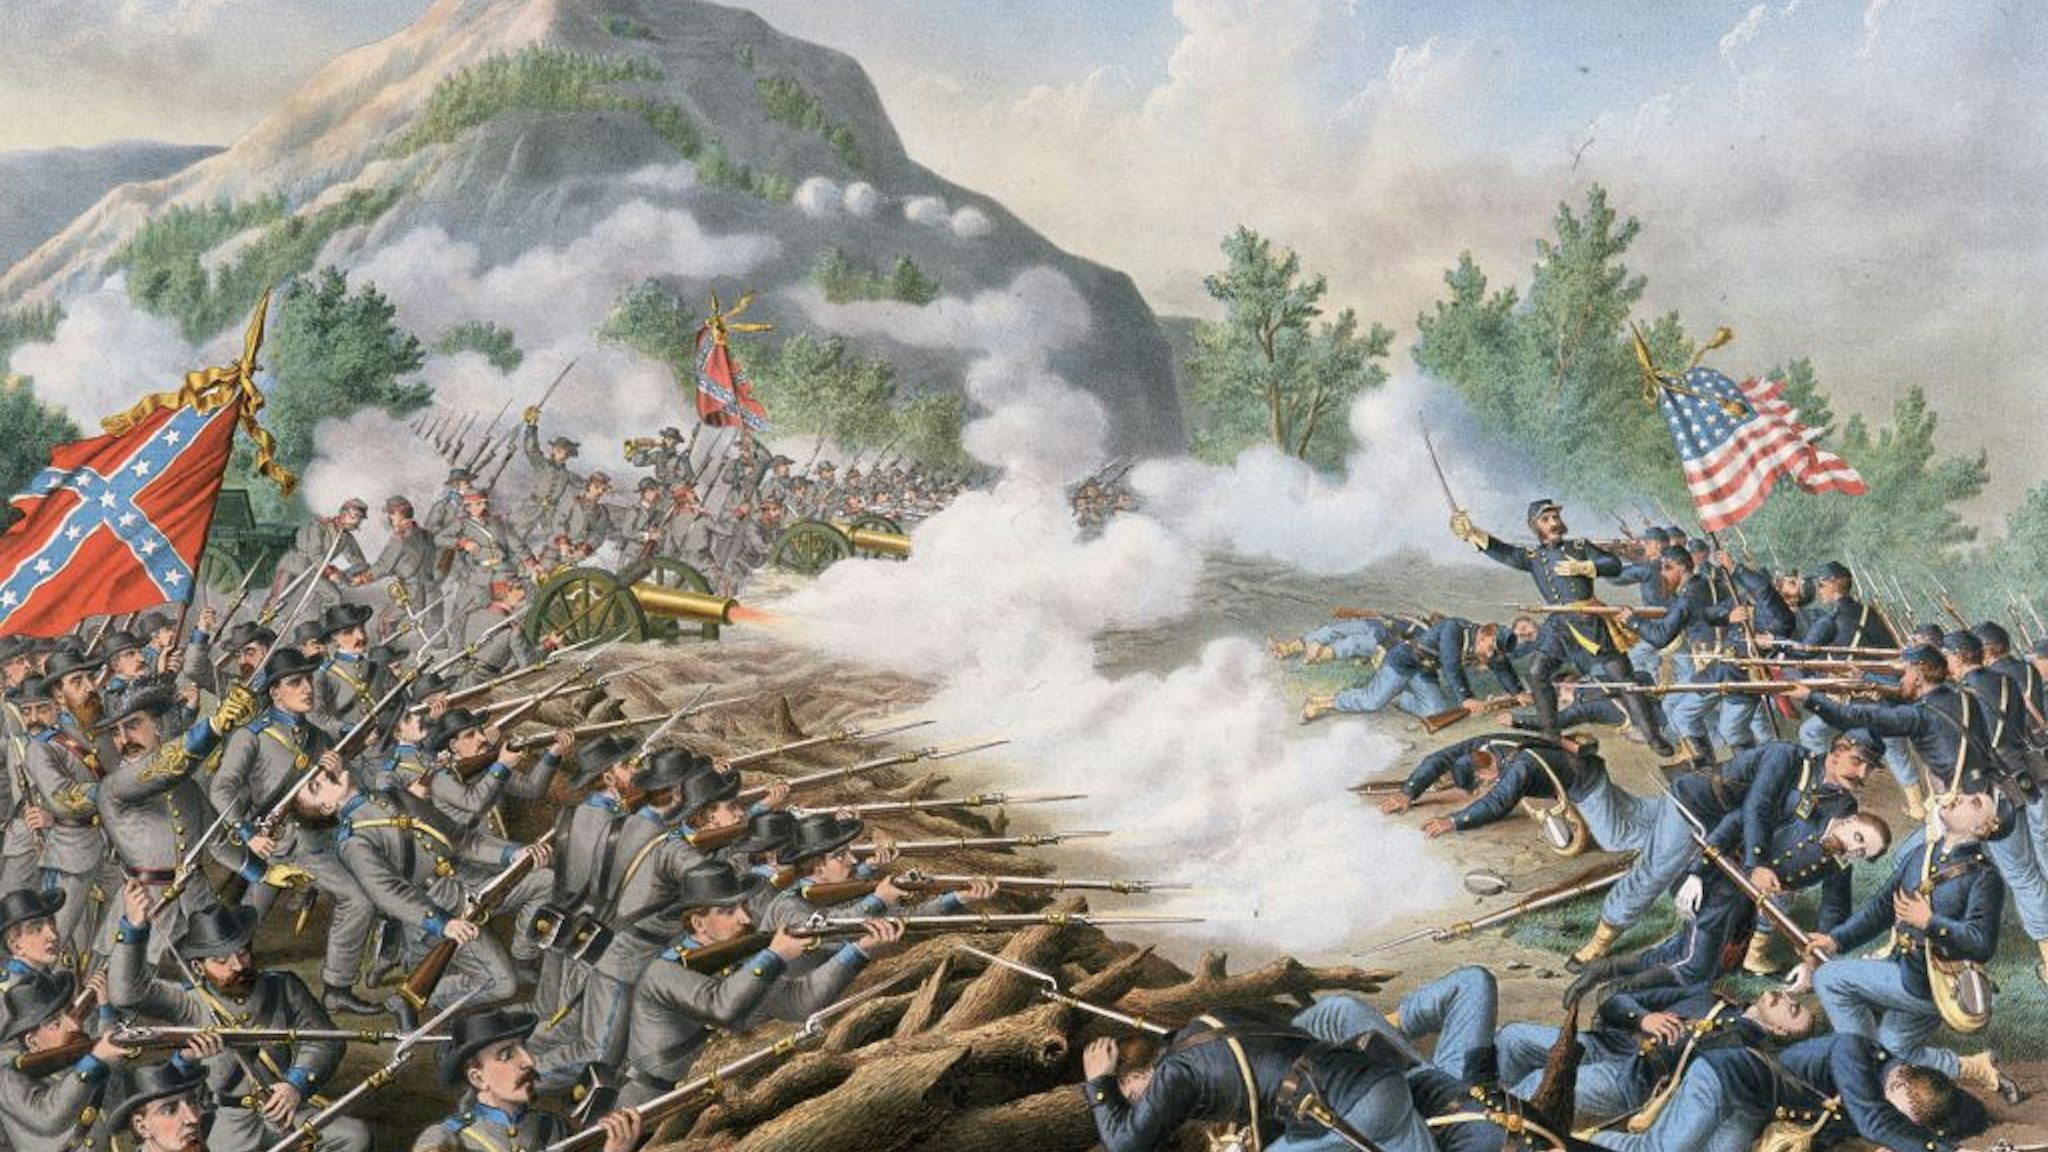 27th June 1864: US Civil War 1861-65. The Atlanta Campaign. Major General William T. Sherman sent Union forces to attack Confederate General Joseph E. Johnston's entrenched position at Kennesaw Mountain, Georgia, which protected the rail supply link to Atlanta. Confederate artillery and rifle fire inflicted heavy Union casualties, repulsed the attack and won the battle. An 1891 color illustration.